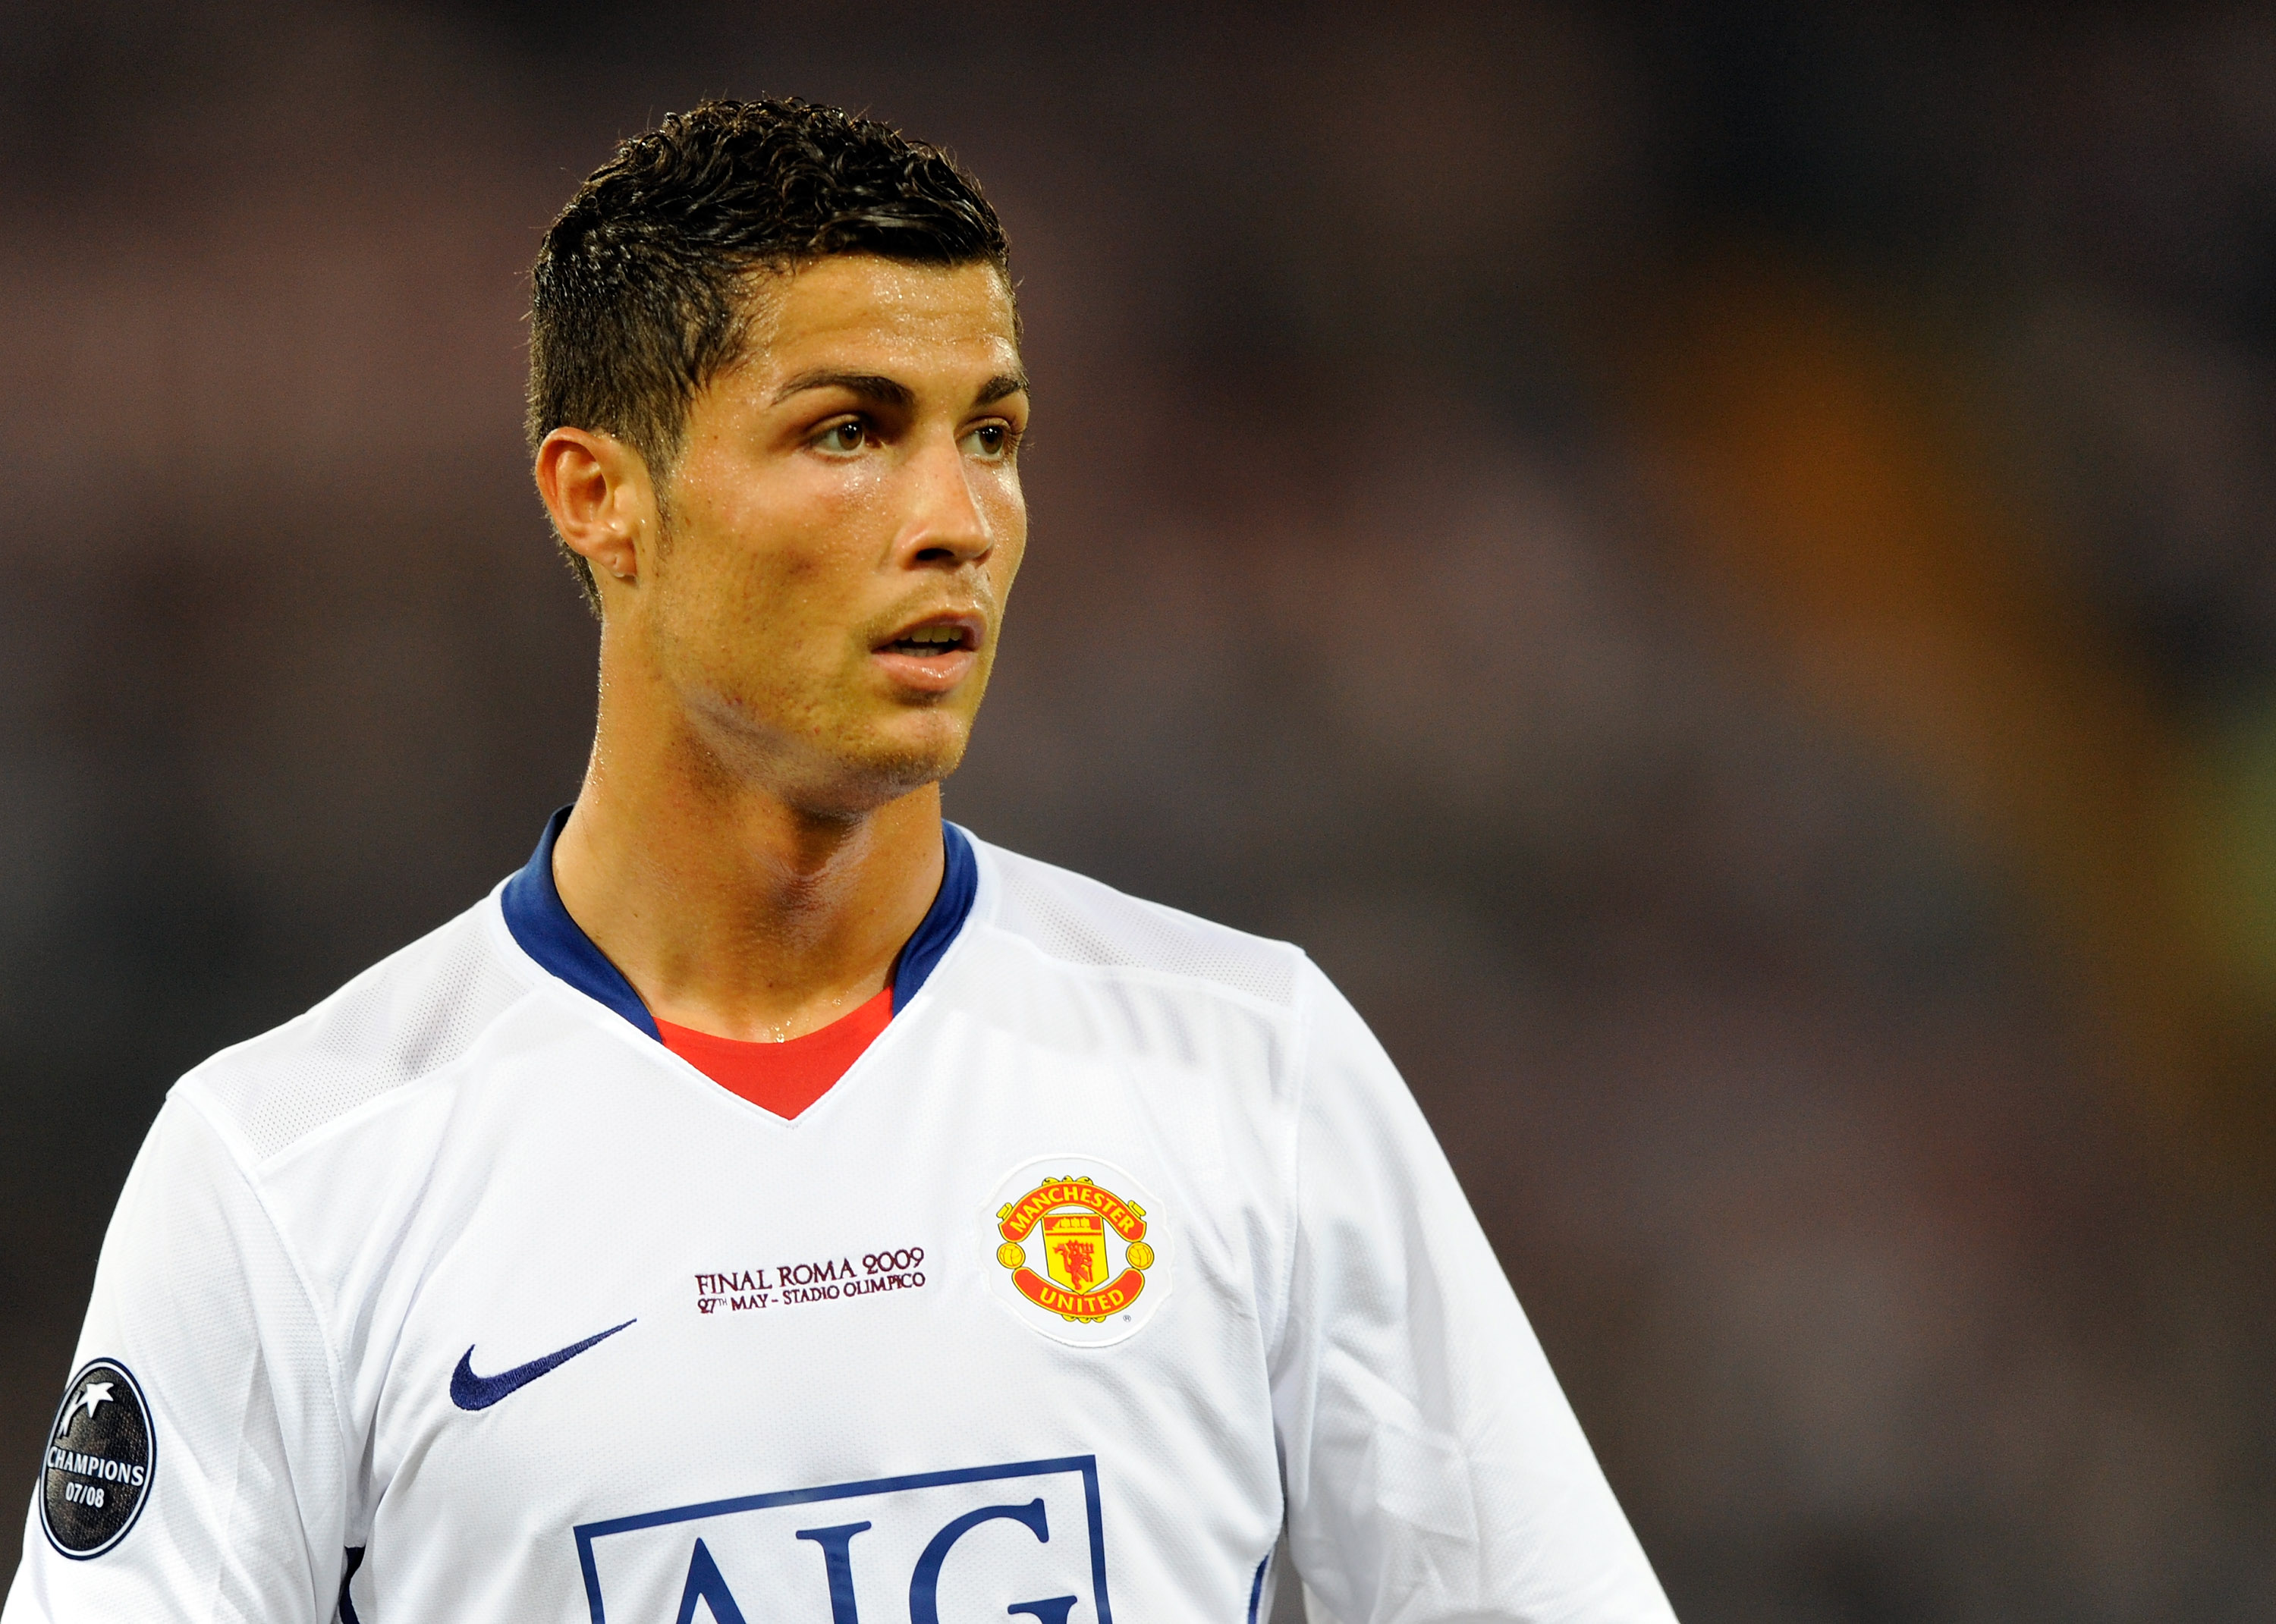 ROME - MAY 27: Cristiano Ronaldo of Manchester United during the UEFA Champions League Final match between Barcelona and Manchester United at the Stadio Olimpico on May 27, 2009 in Rome, Italy. (Photo by Claudio Villa/Getty Images)